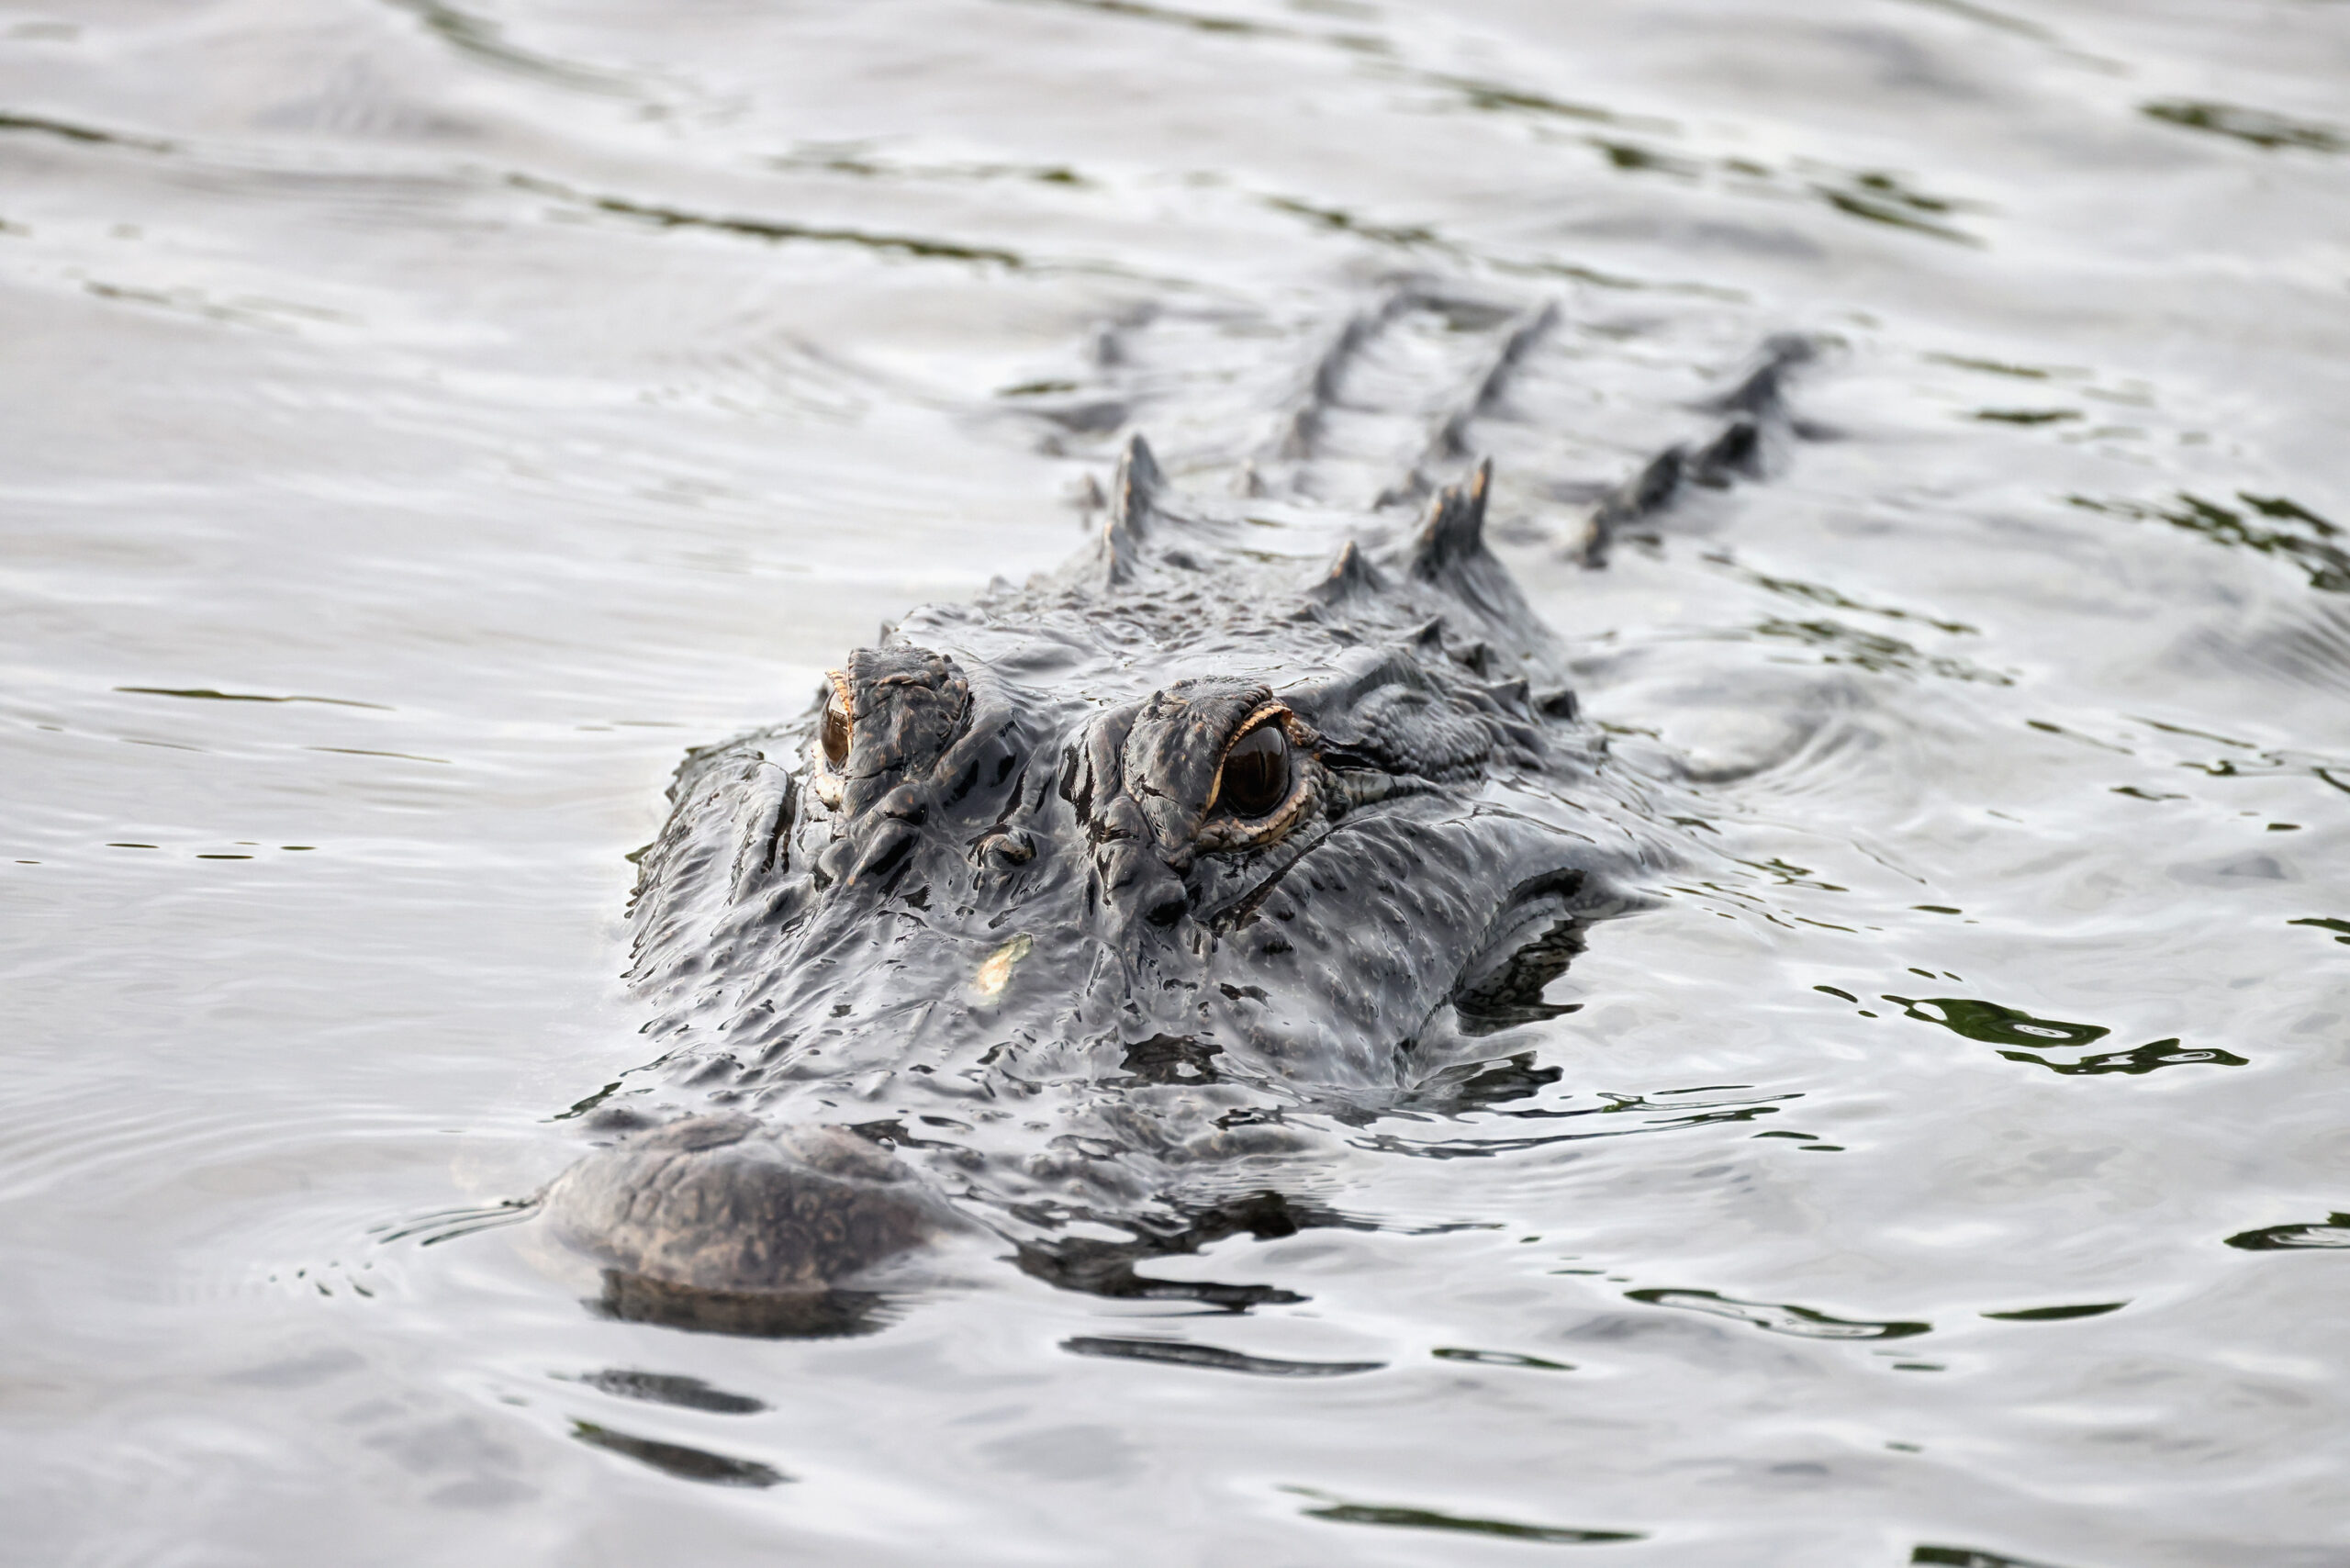 No One Knows Why This 7-Foot Alligator Showed Up Near Sacramento